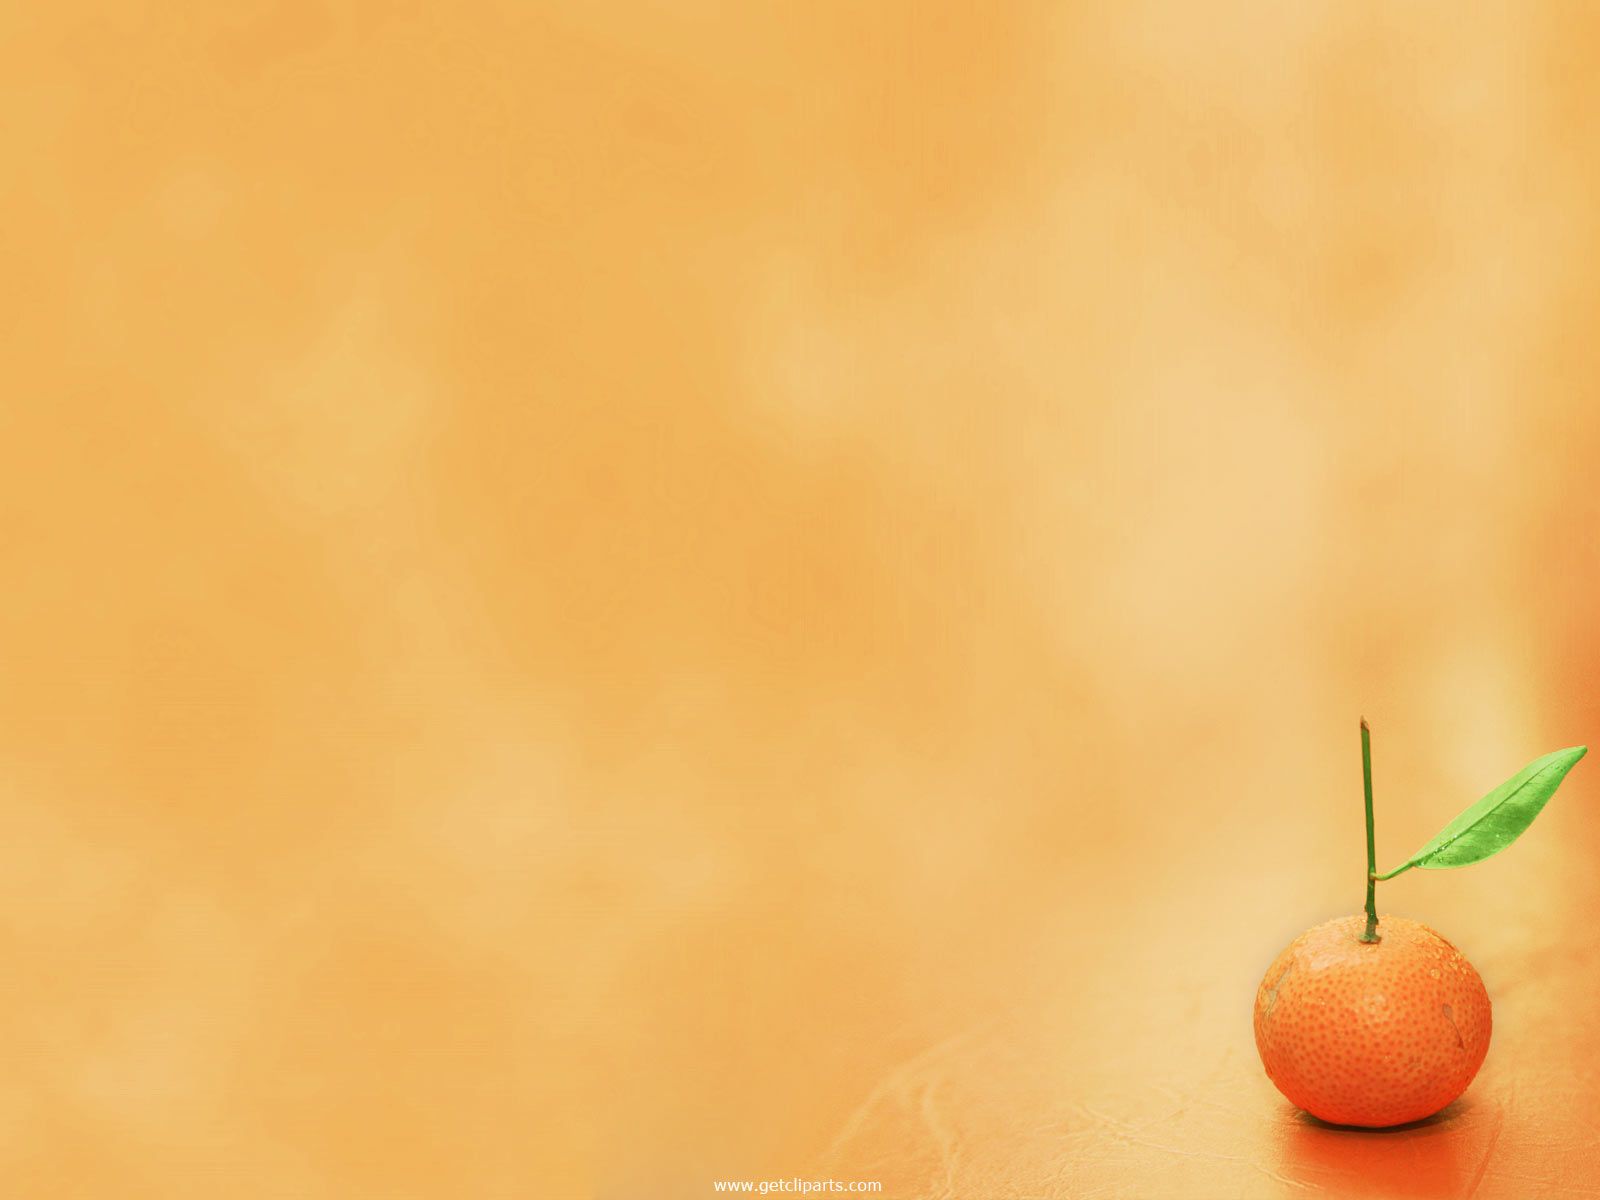 Download Food Fruit Backgrounds Powerpoint Wallpaper | Full HD ...